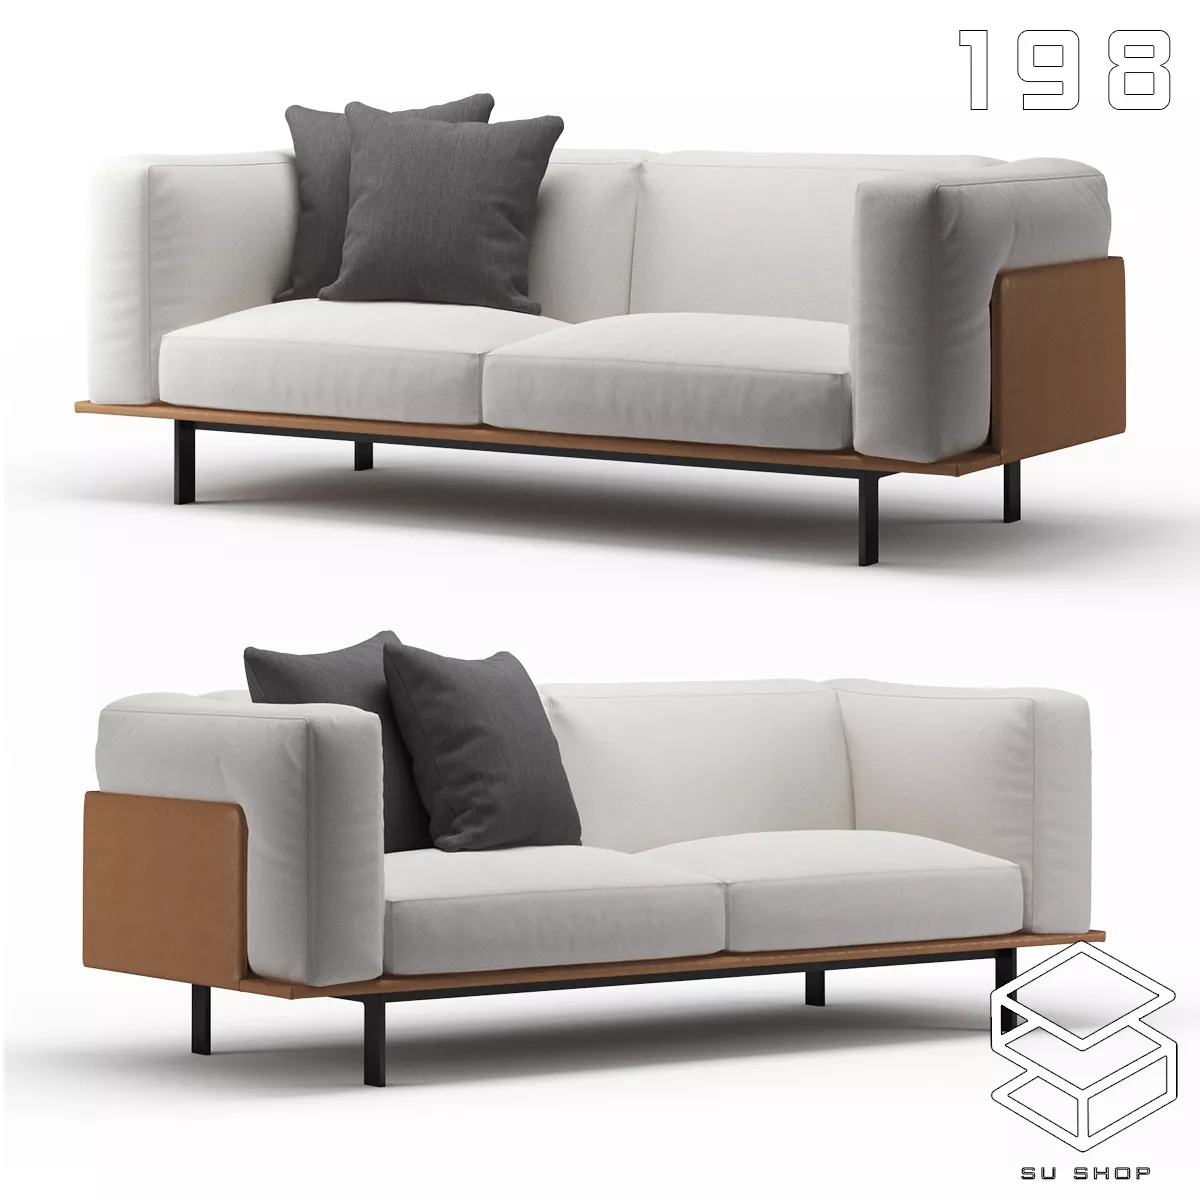 MODERN SOFA - SKETCHUP 3D MODEL - VRAY OR ENSCAPE - ID13494